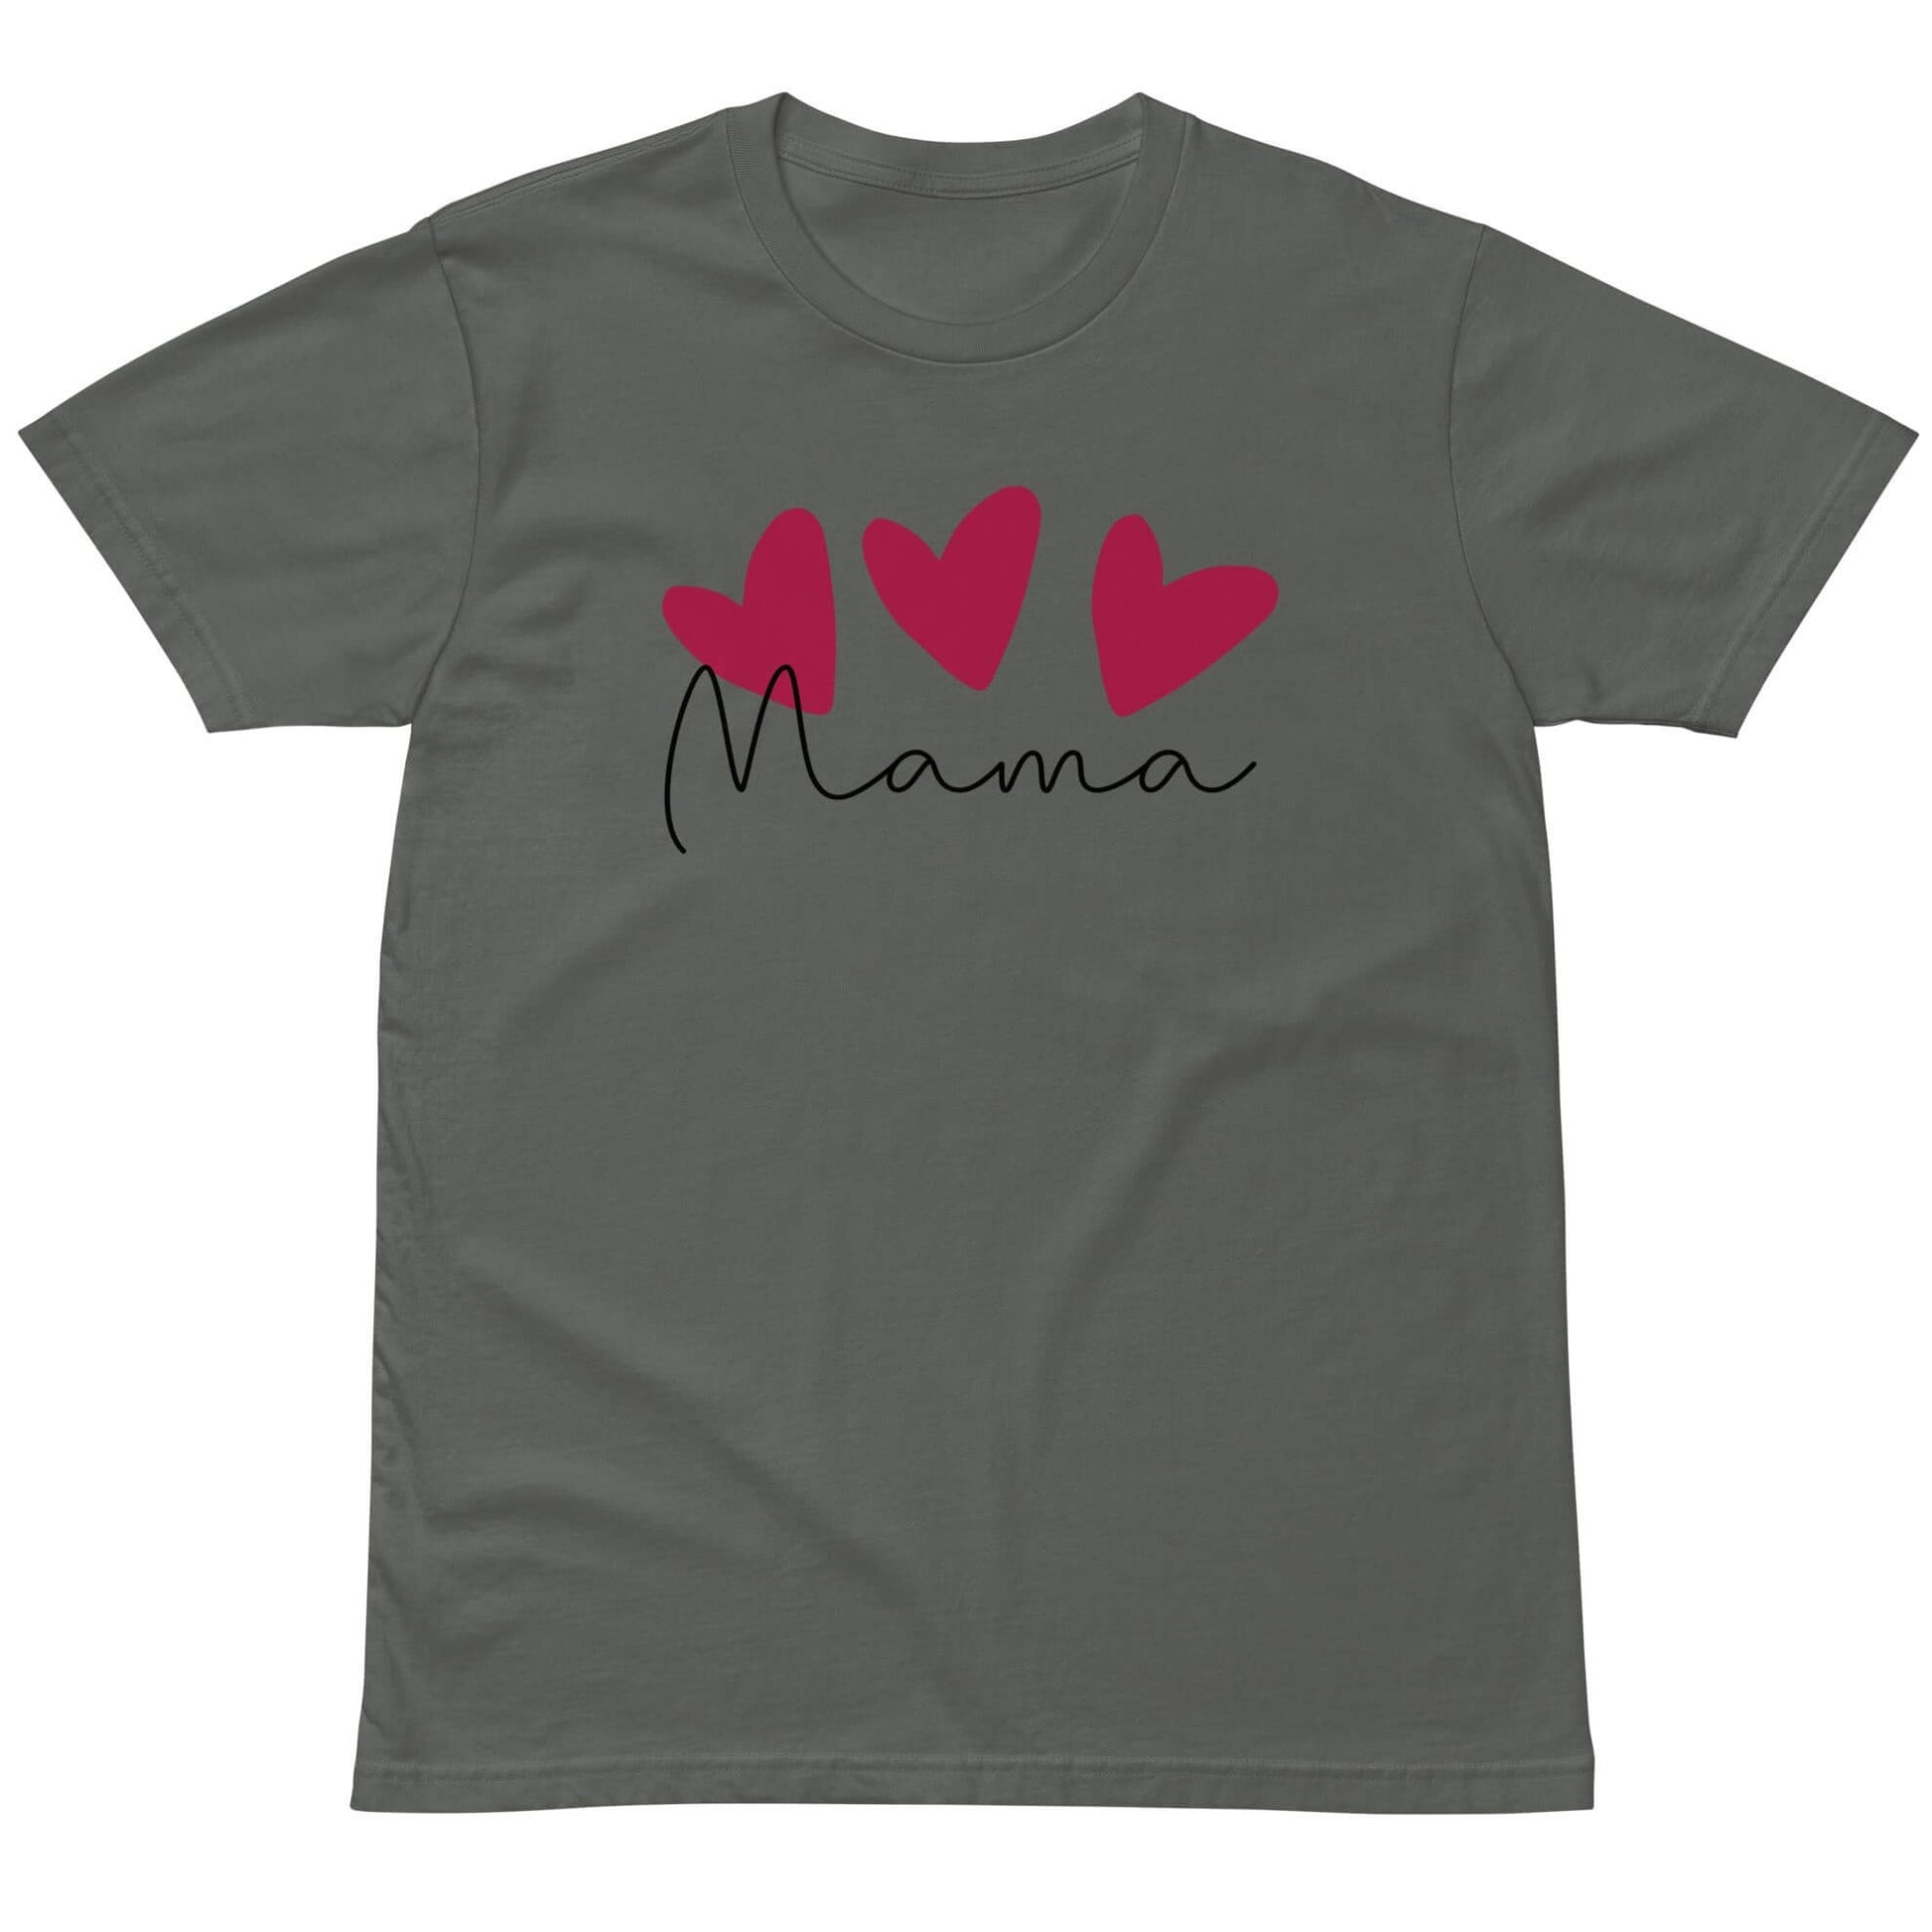 My first mothers day mom shirt